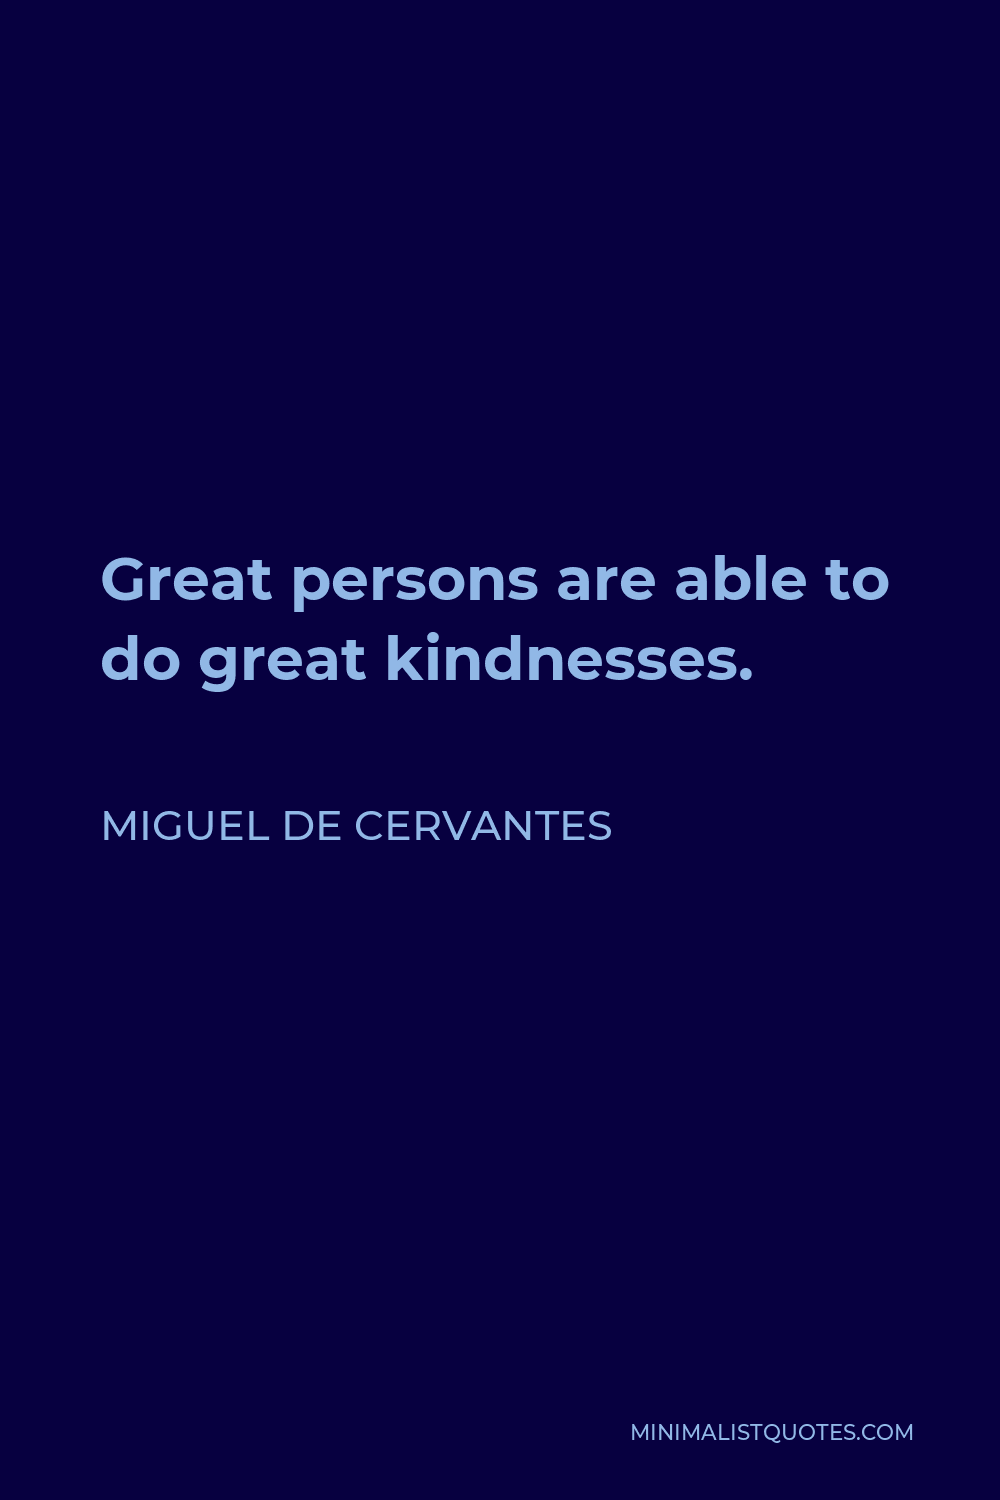 Miguel de Cervantes Quote - Great persons are able to do great kindnesses.